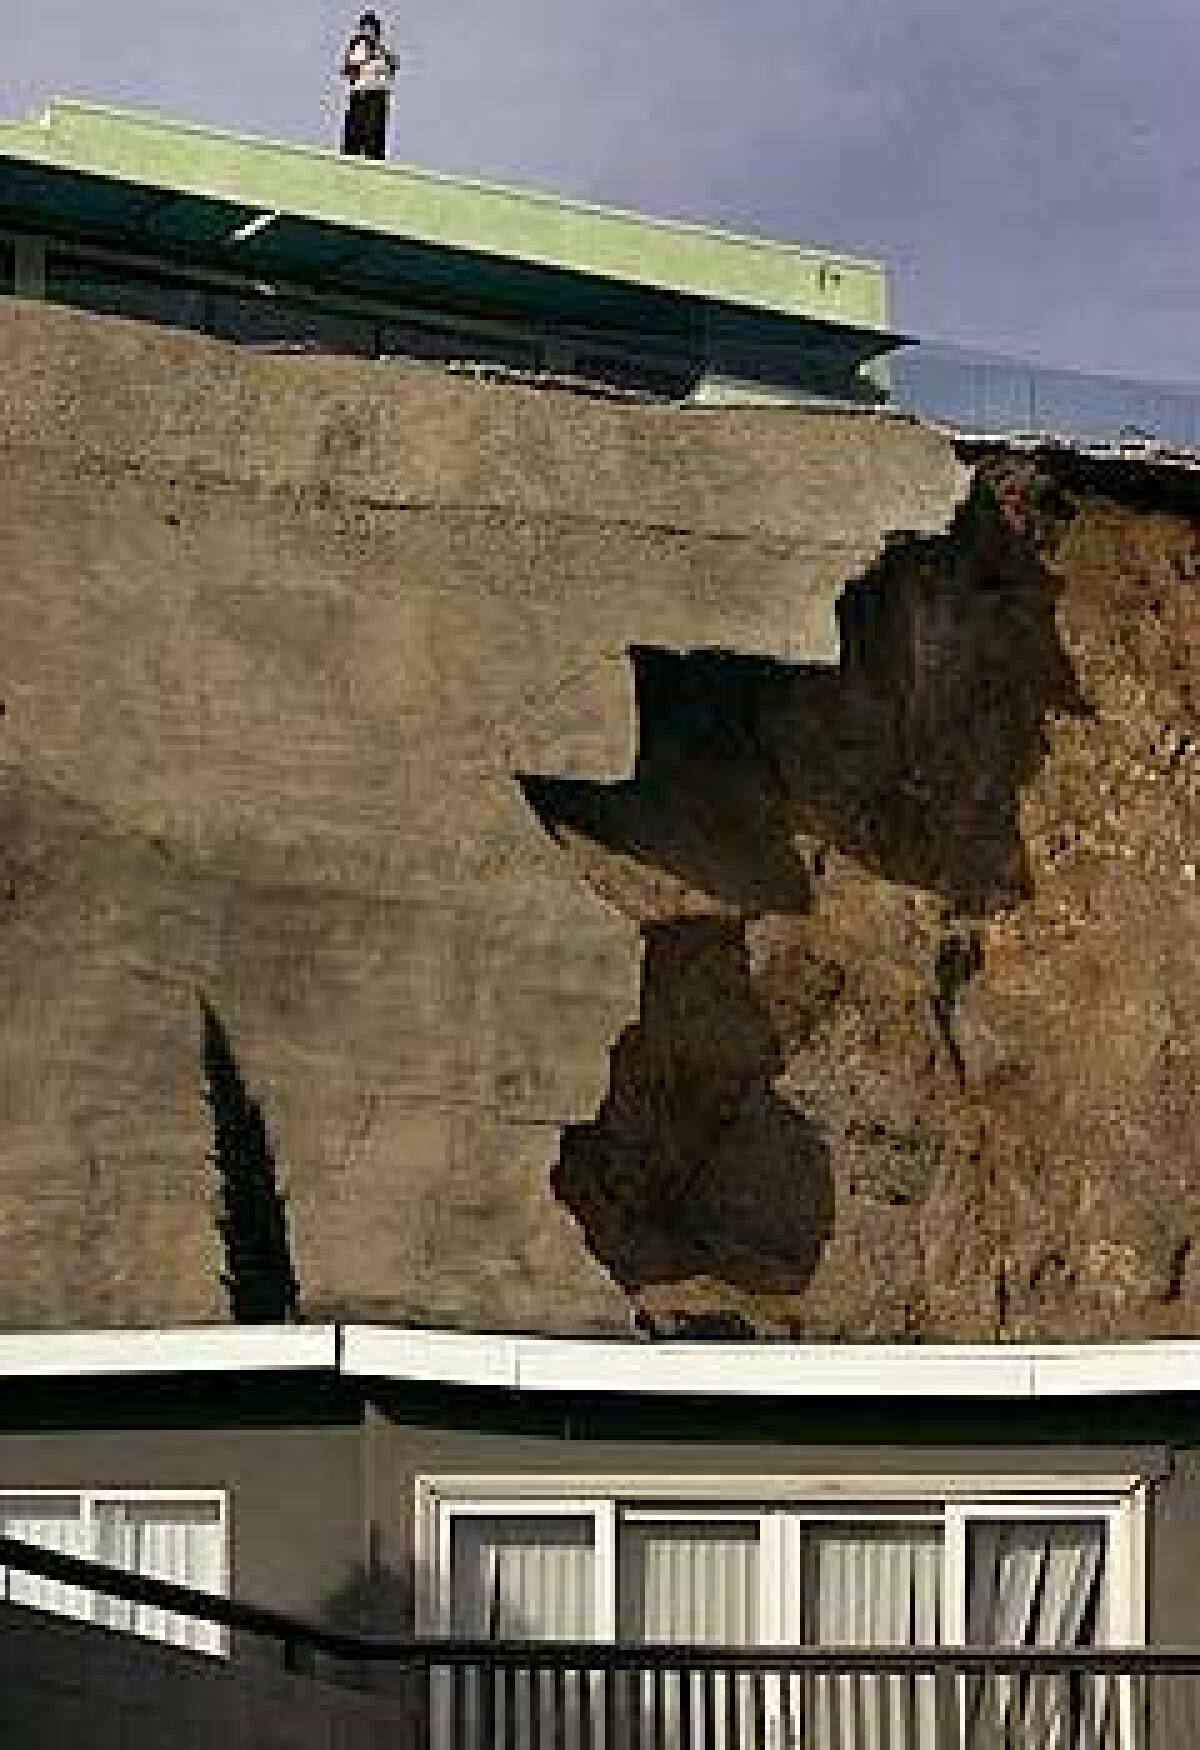 The landslide that knocked this Hollywood Hills house off its foundation Nov. 29 is under investigation.